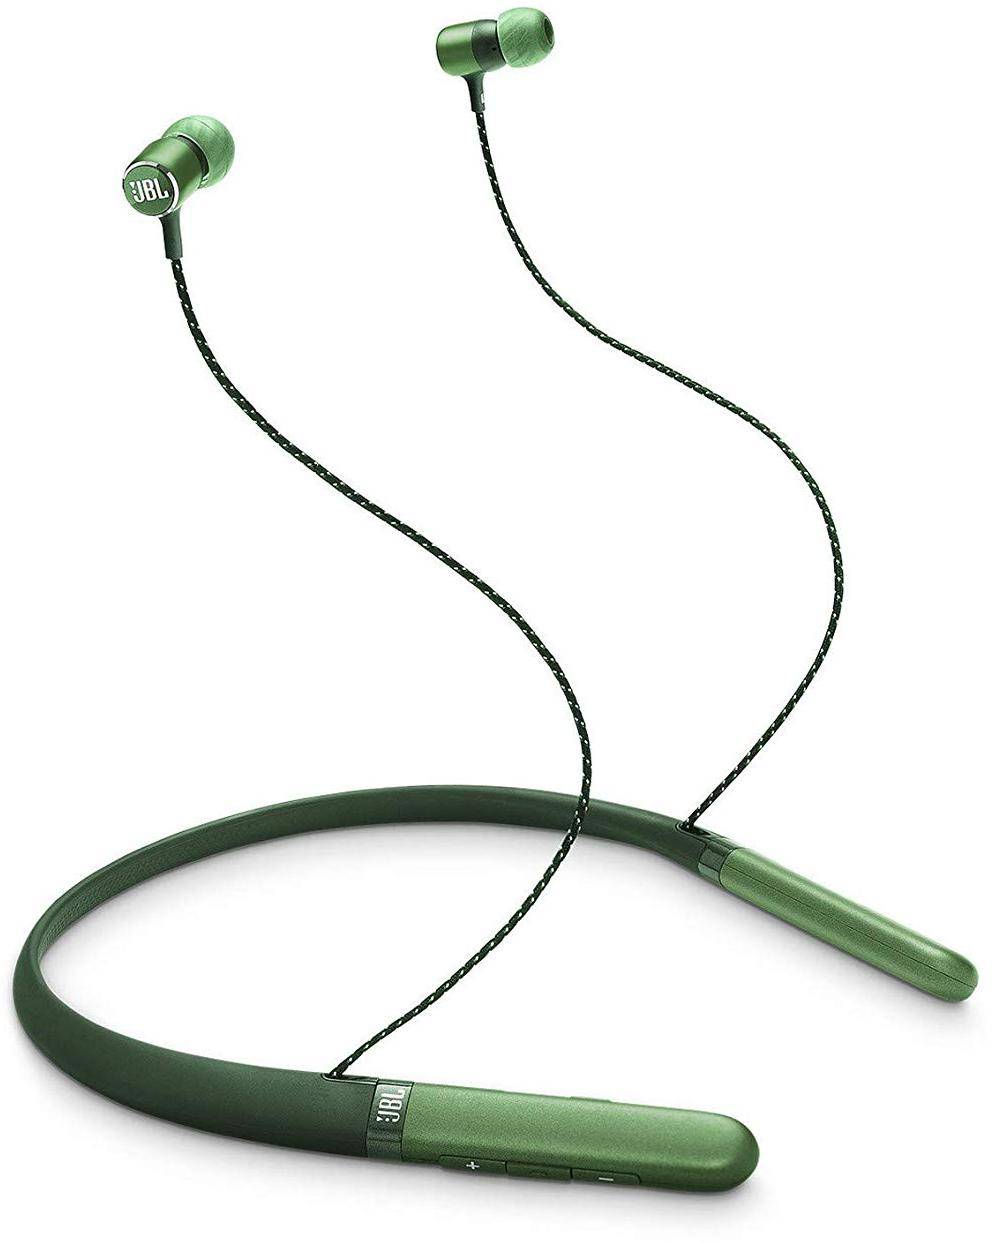 JBL Live 200BT Wireless in-Ear Neckband Headphones with Mic zoom image